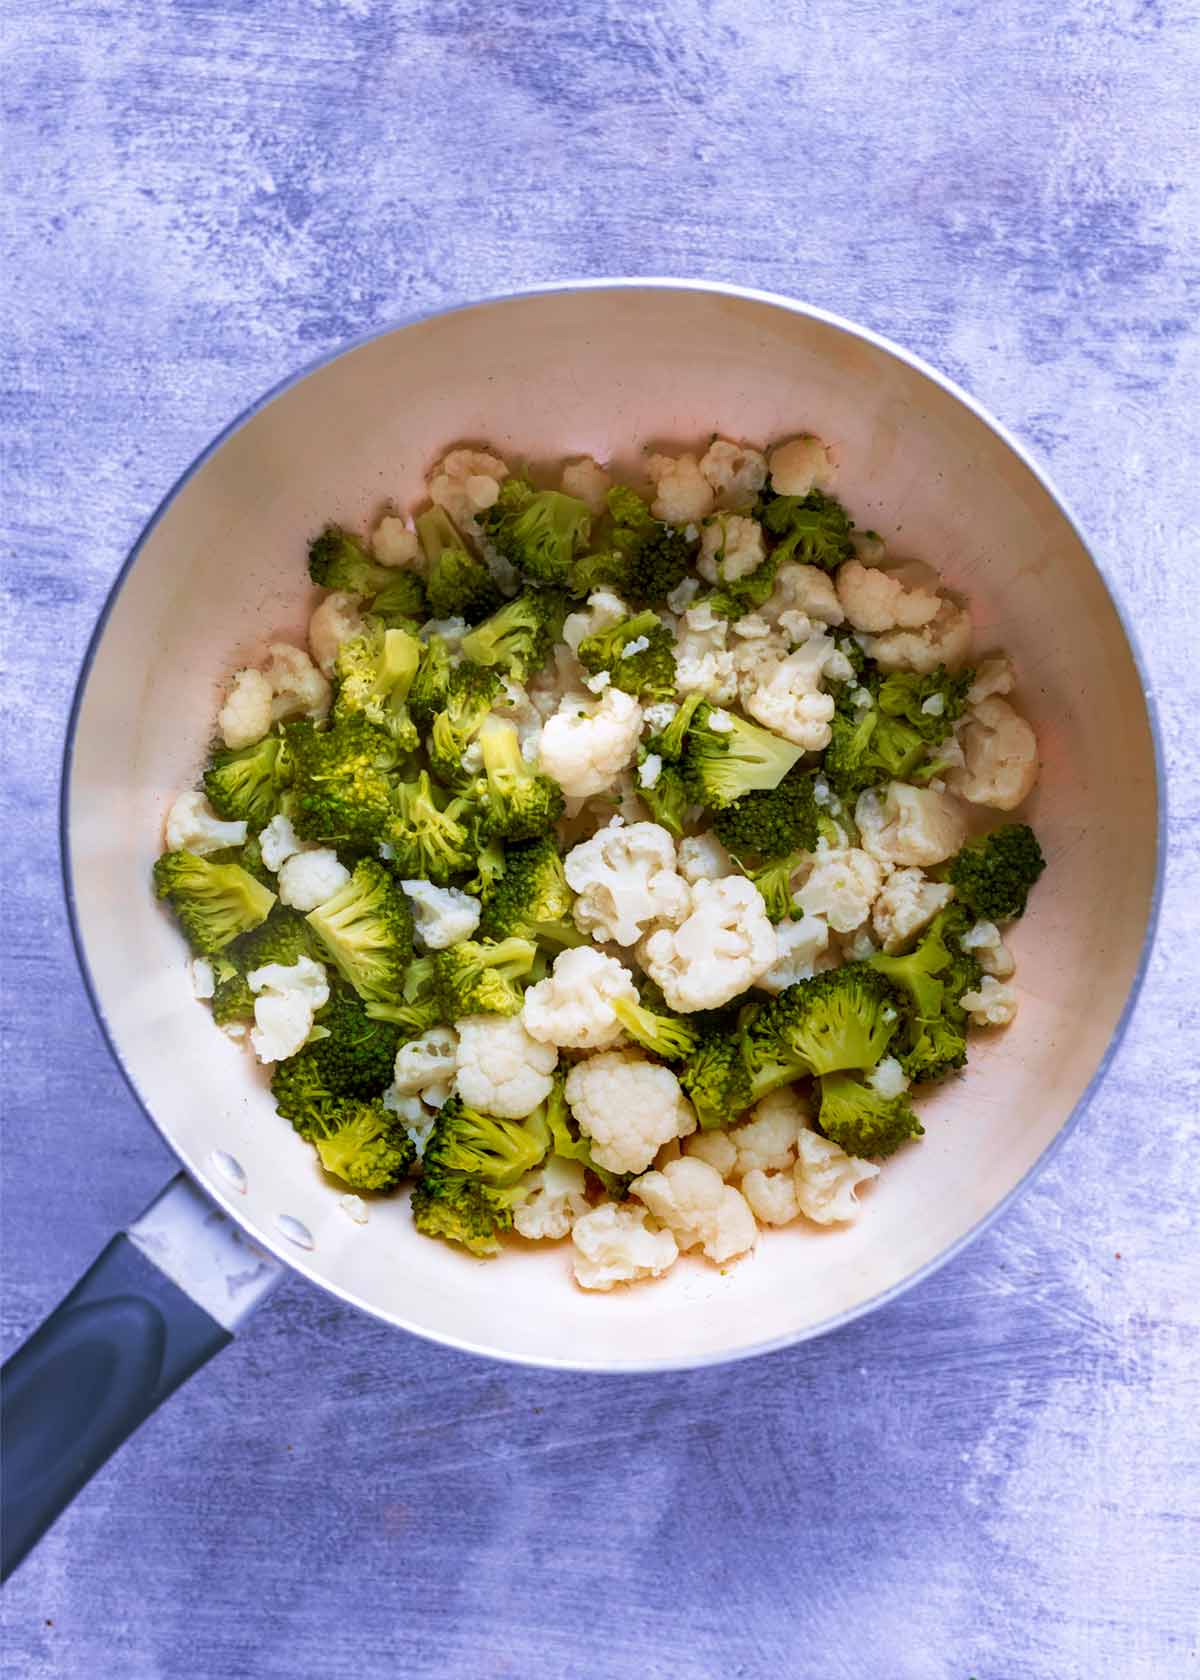 A saucepan containing small florets of broccoli and cauliflower.